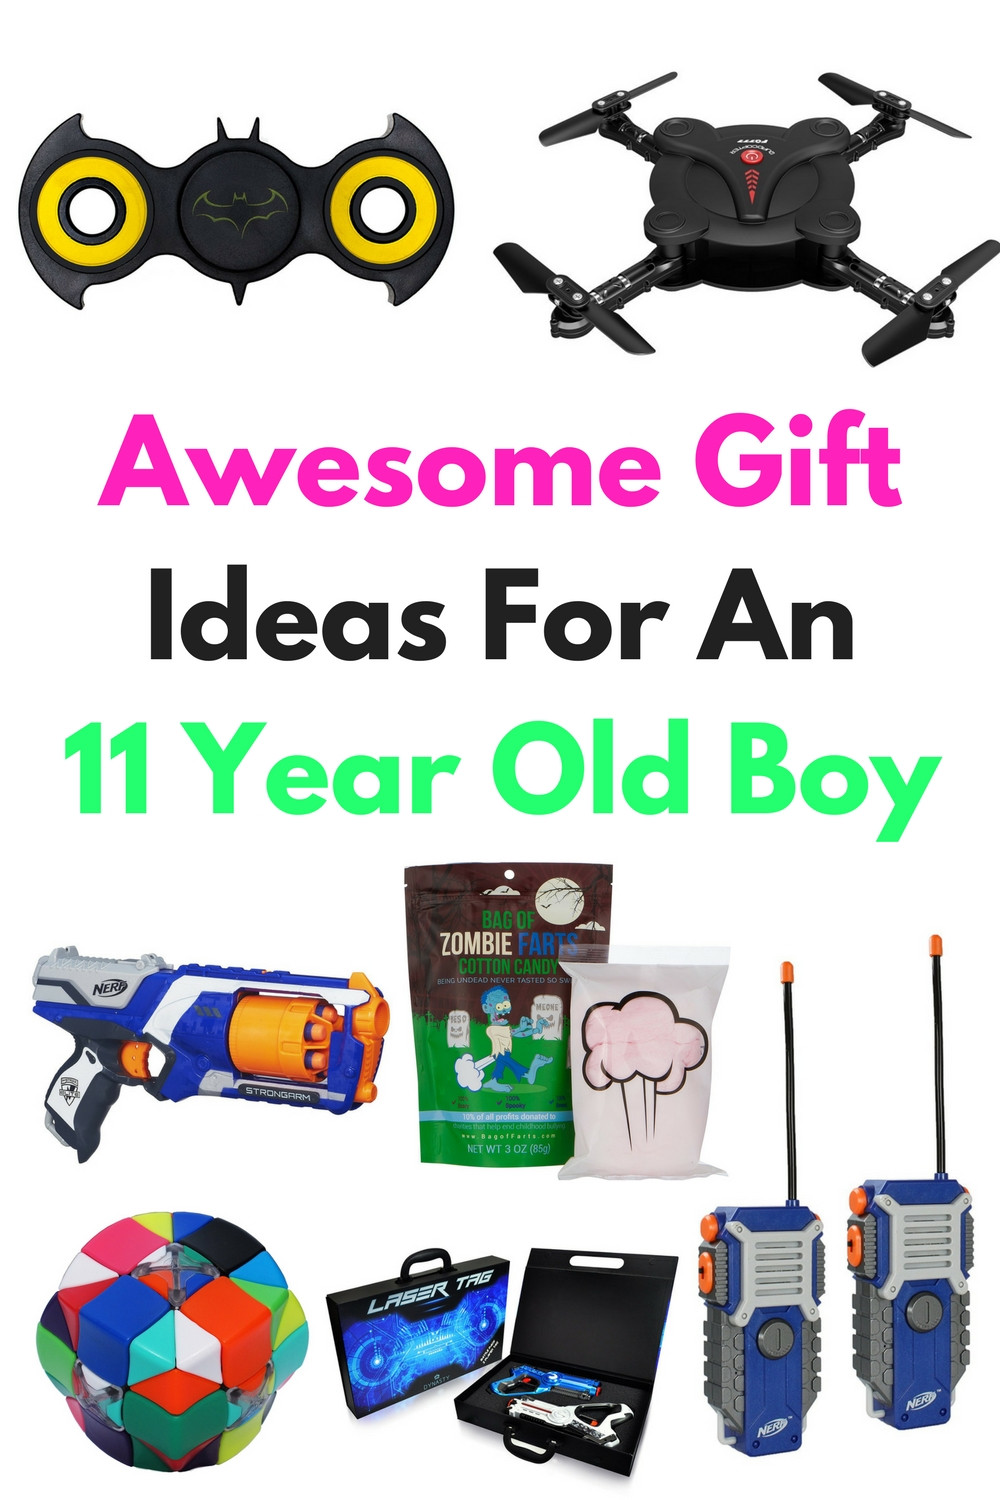 11 Year Old Birthday Gift Ideas
 Awesome Gift Ideas For An 11 Year Old Boy